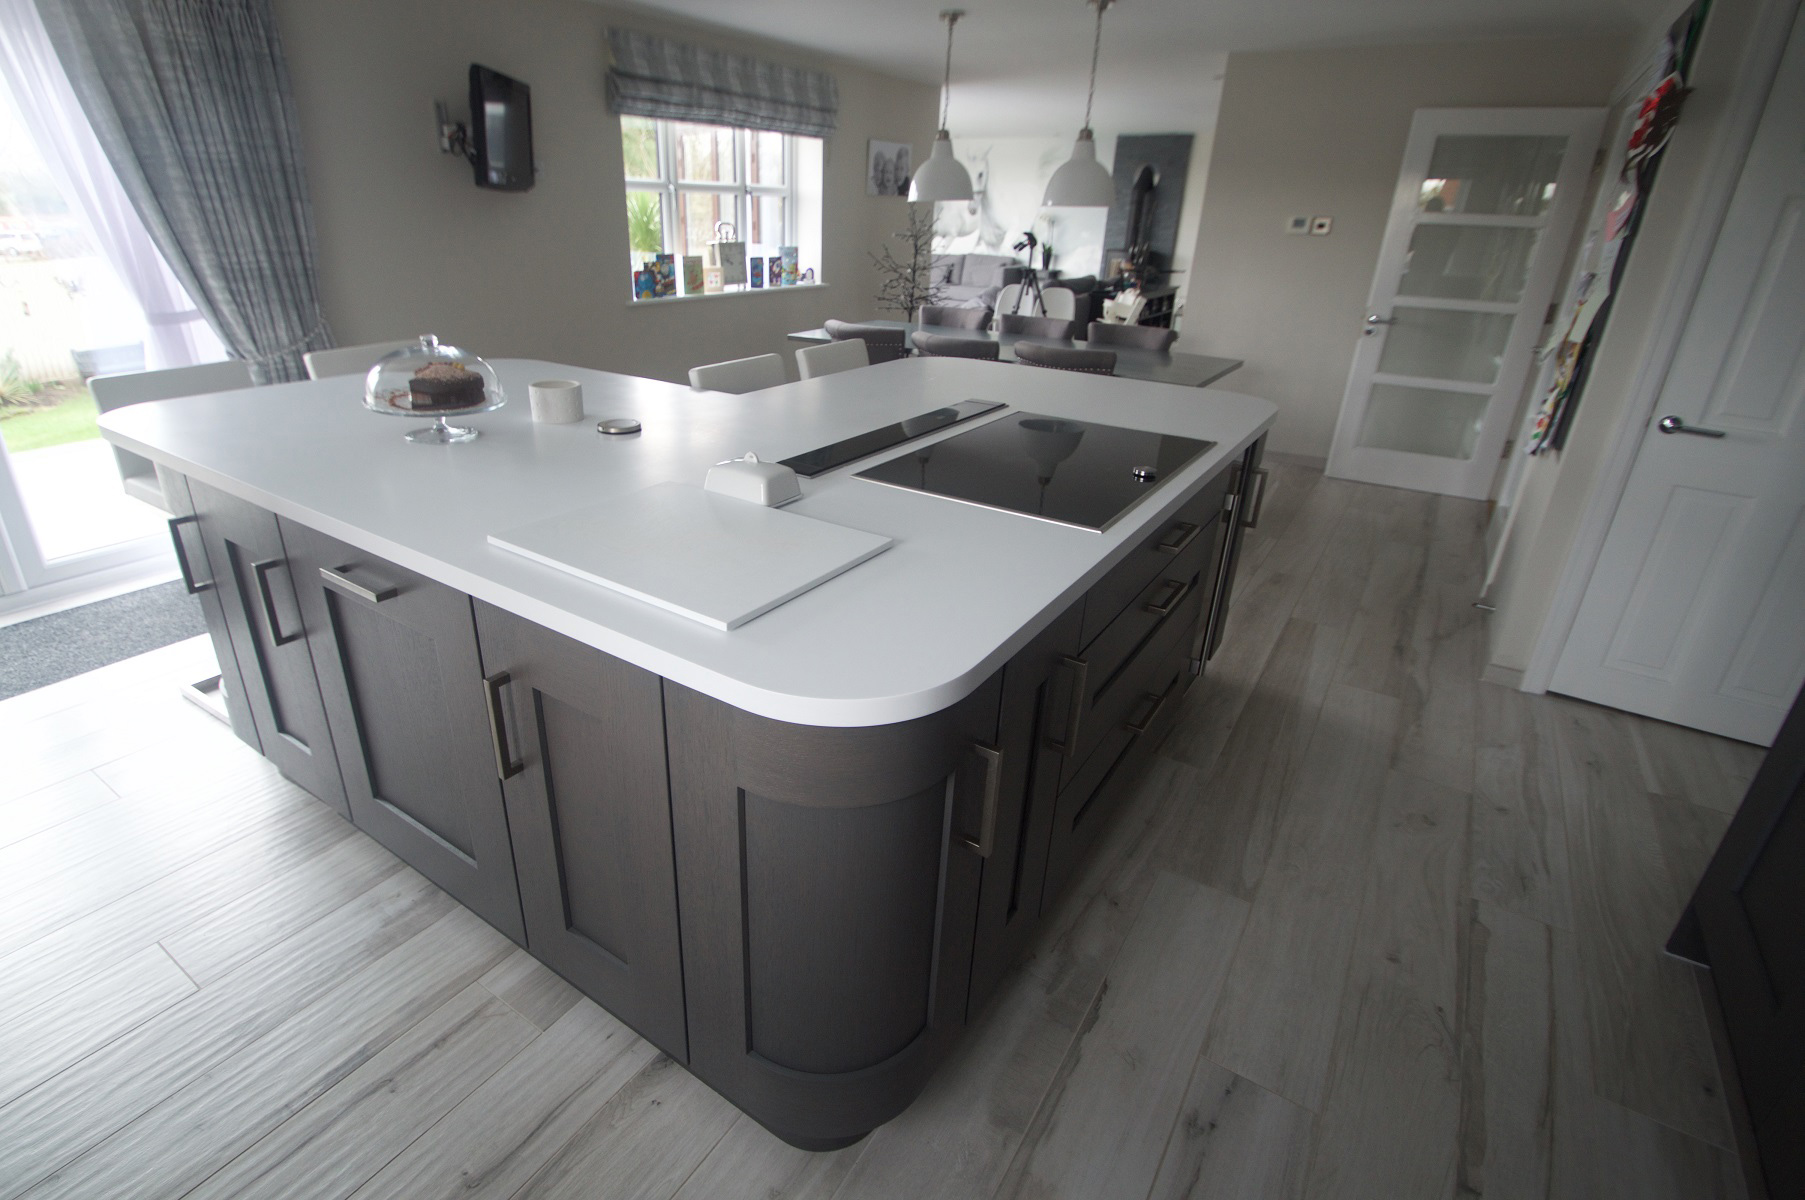 Clonmel Anthracite Kitchen Island Featuring Curved Doors, Project by Elite Kitchens of Manchester